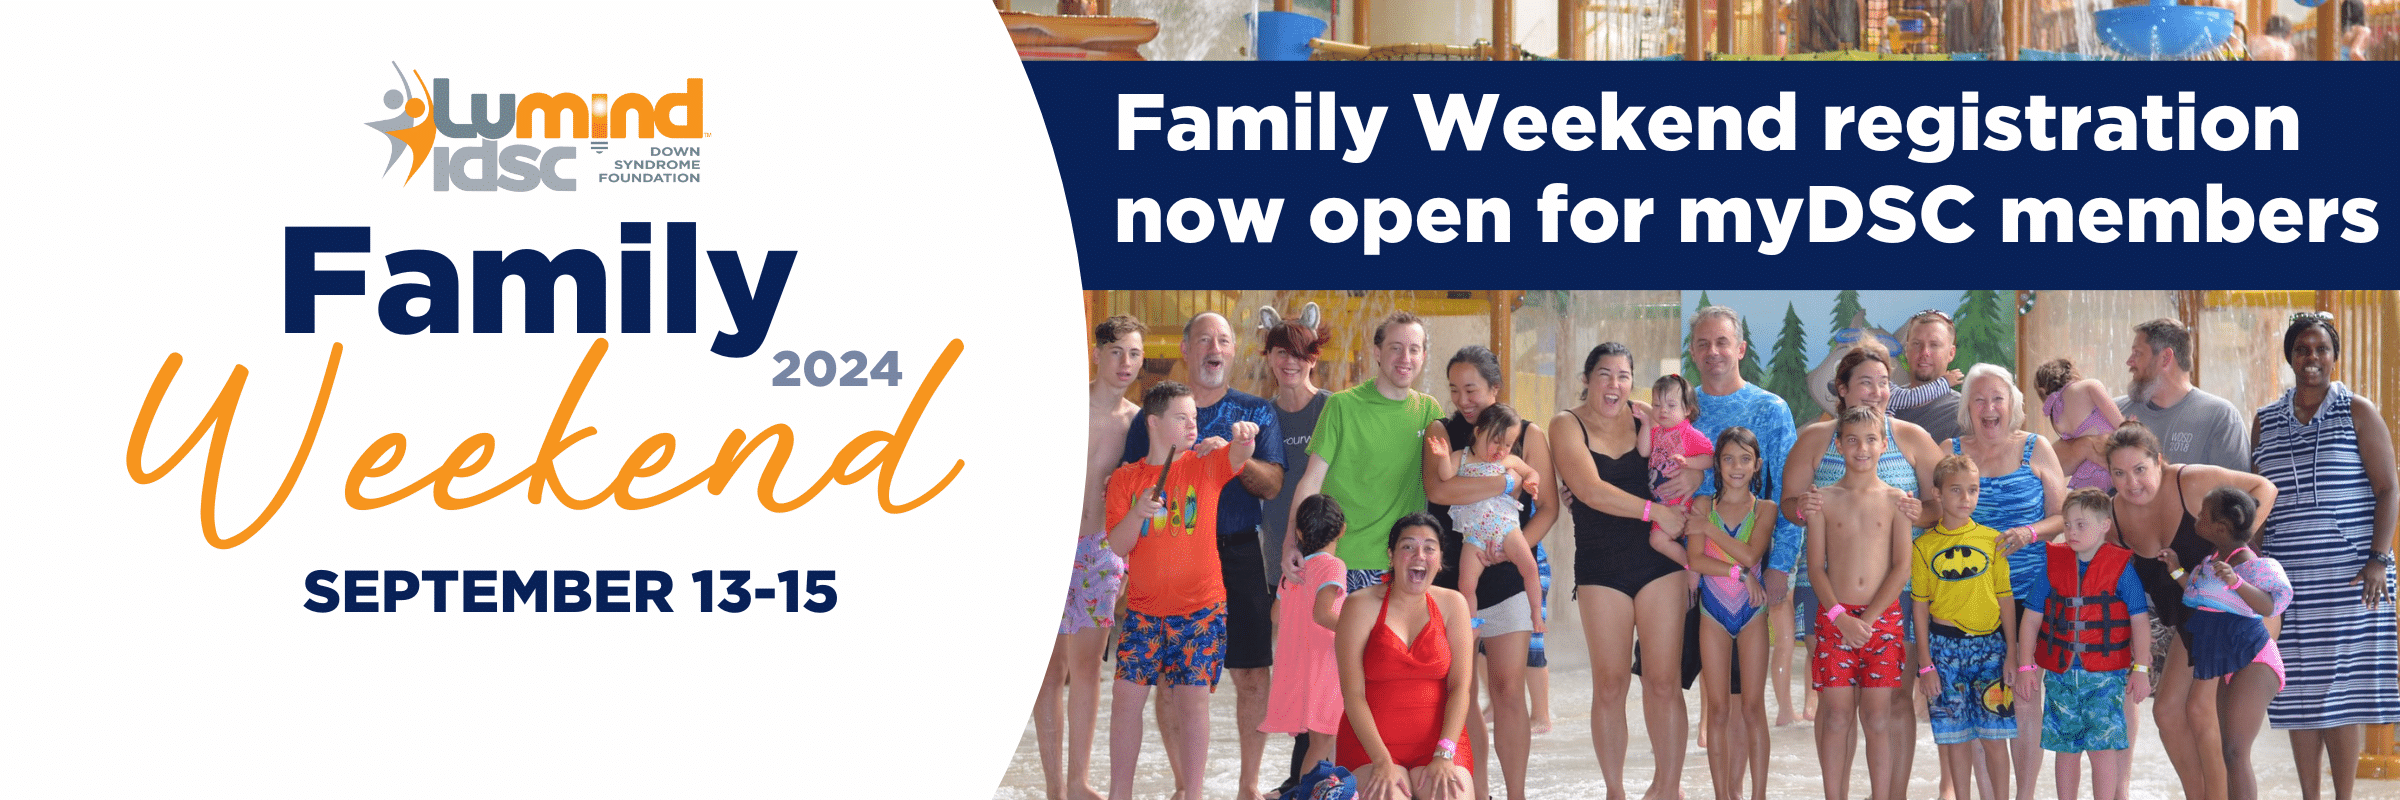 Family weekend is September 13-15 at Great Wolf Lodge